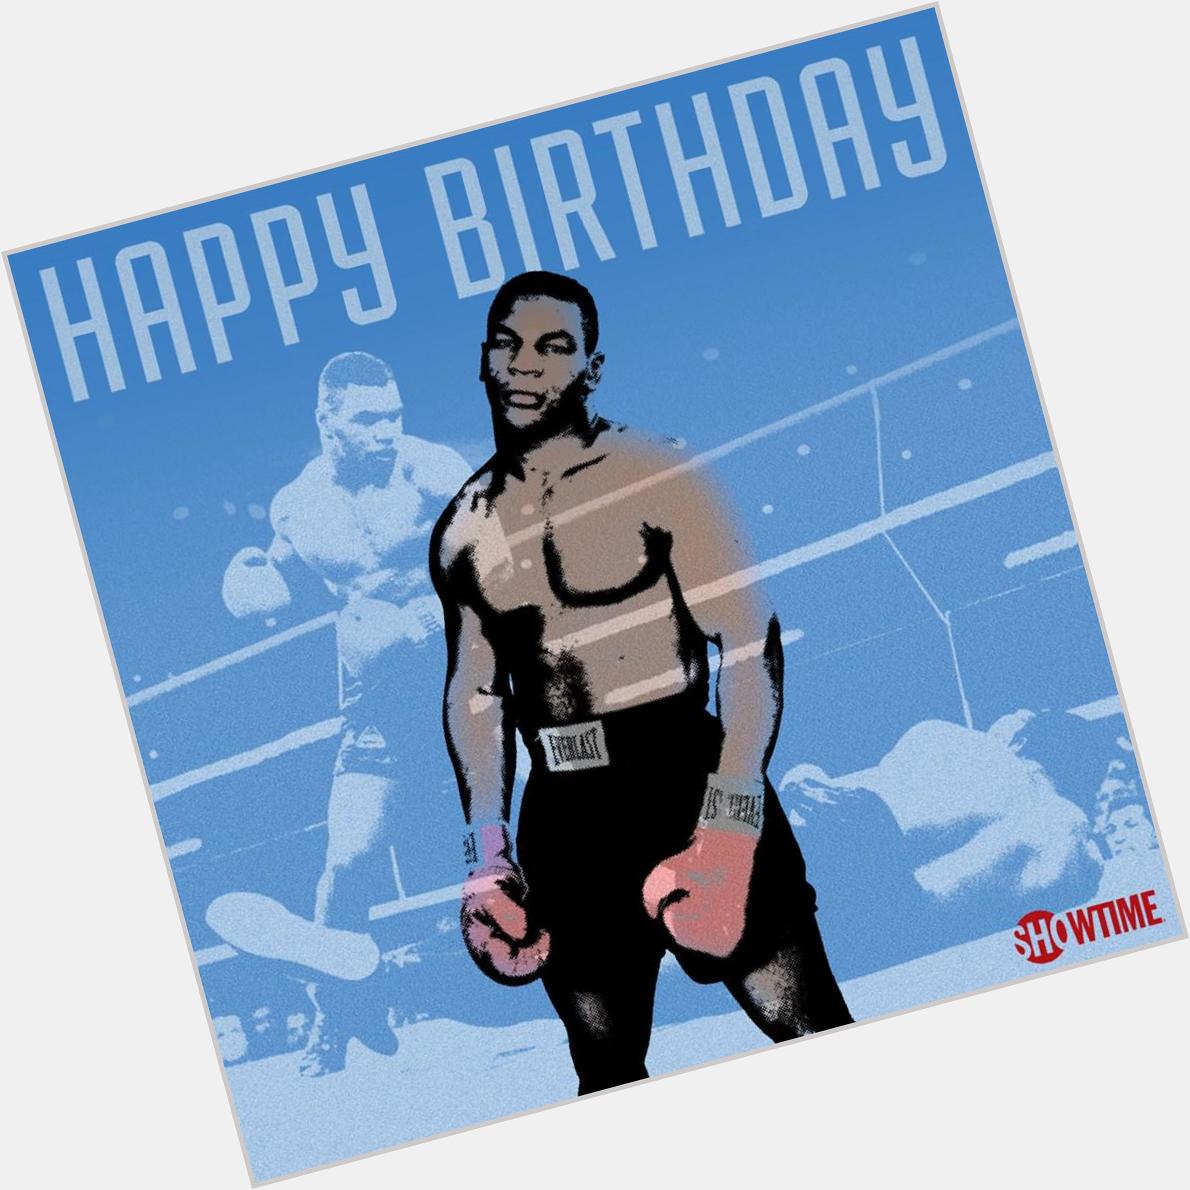 Happy 49th Birthday to the one and only Mike Tyson! Share to show Iron Mike some bday love.   